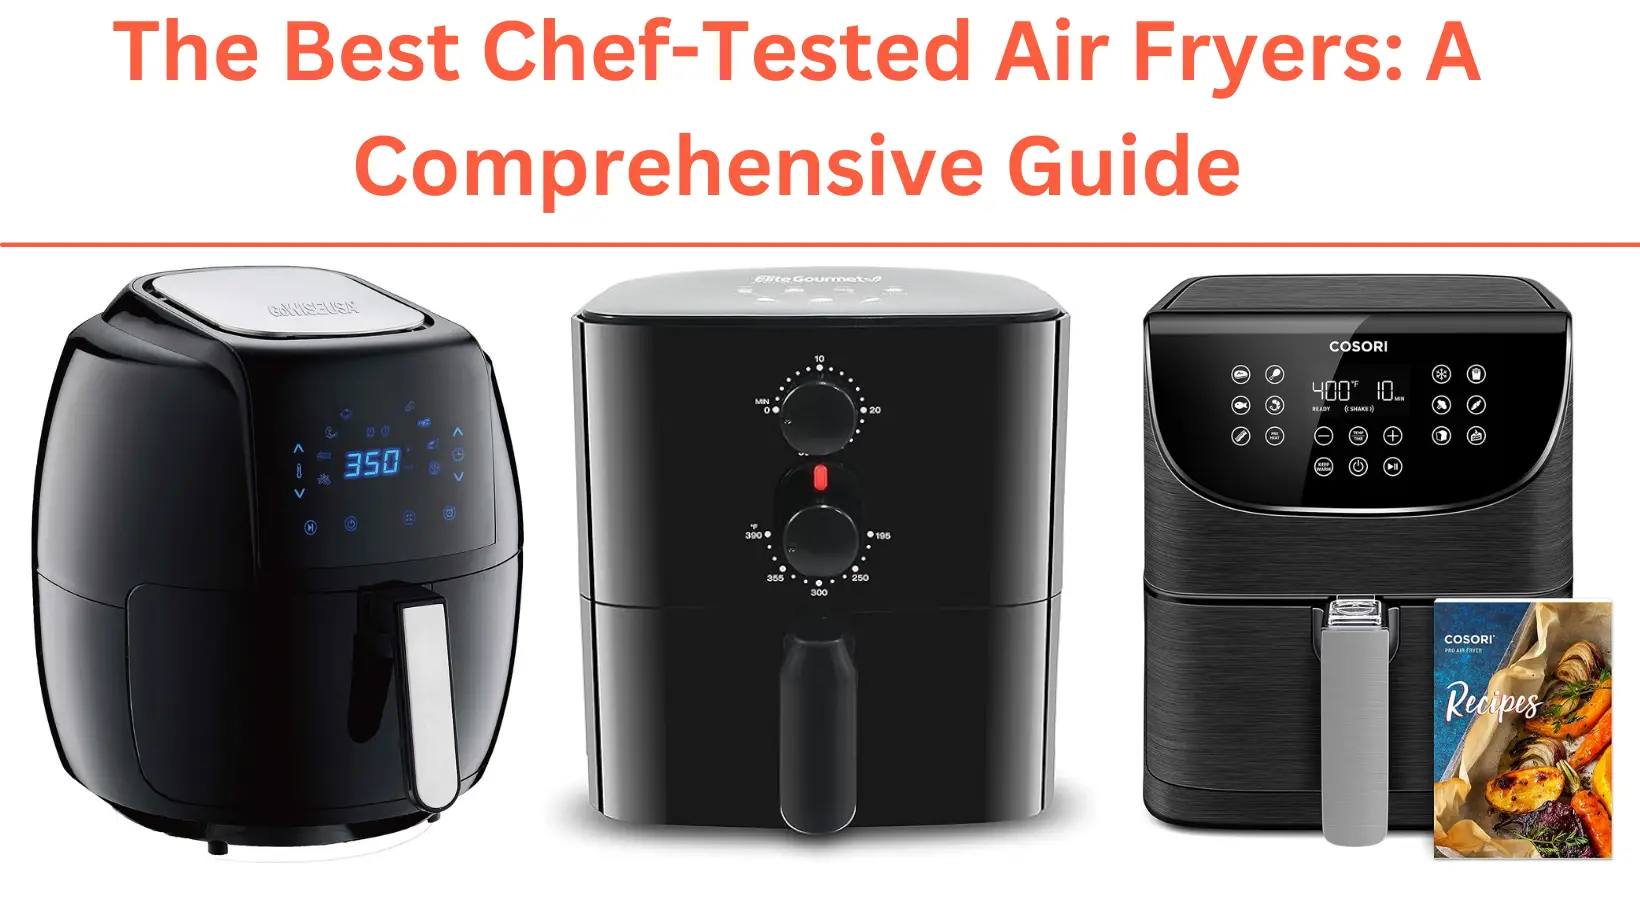 The Best Chef-Tested Air Fryers: A Comprehensive Guide